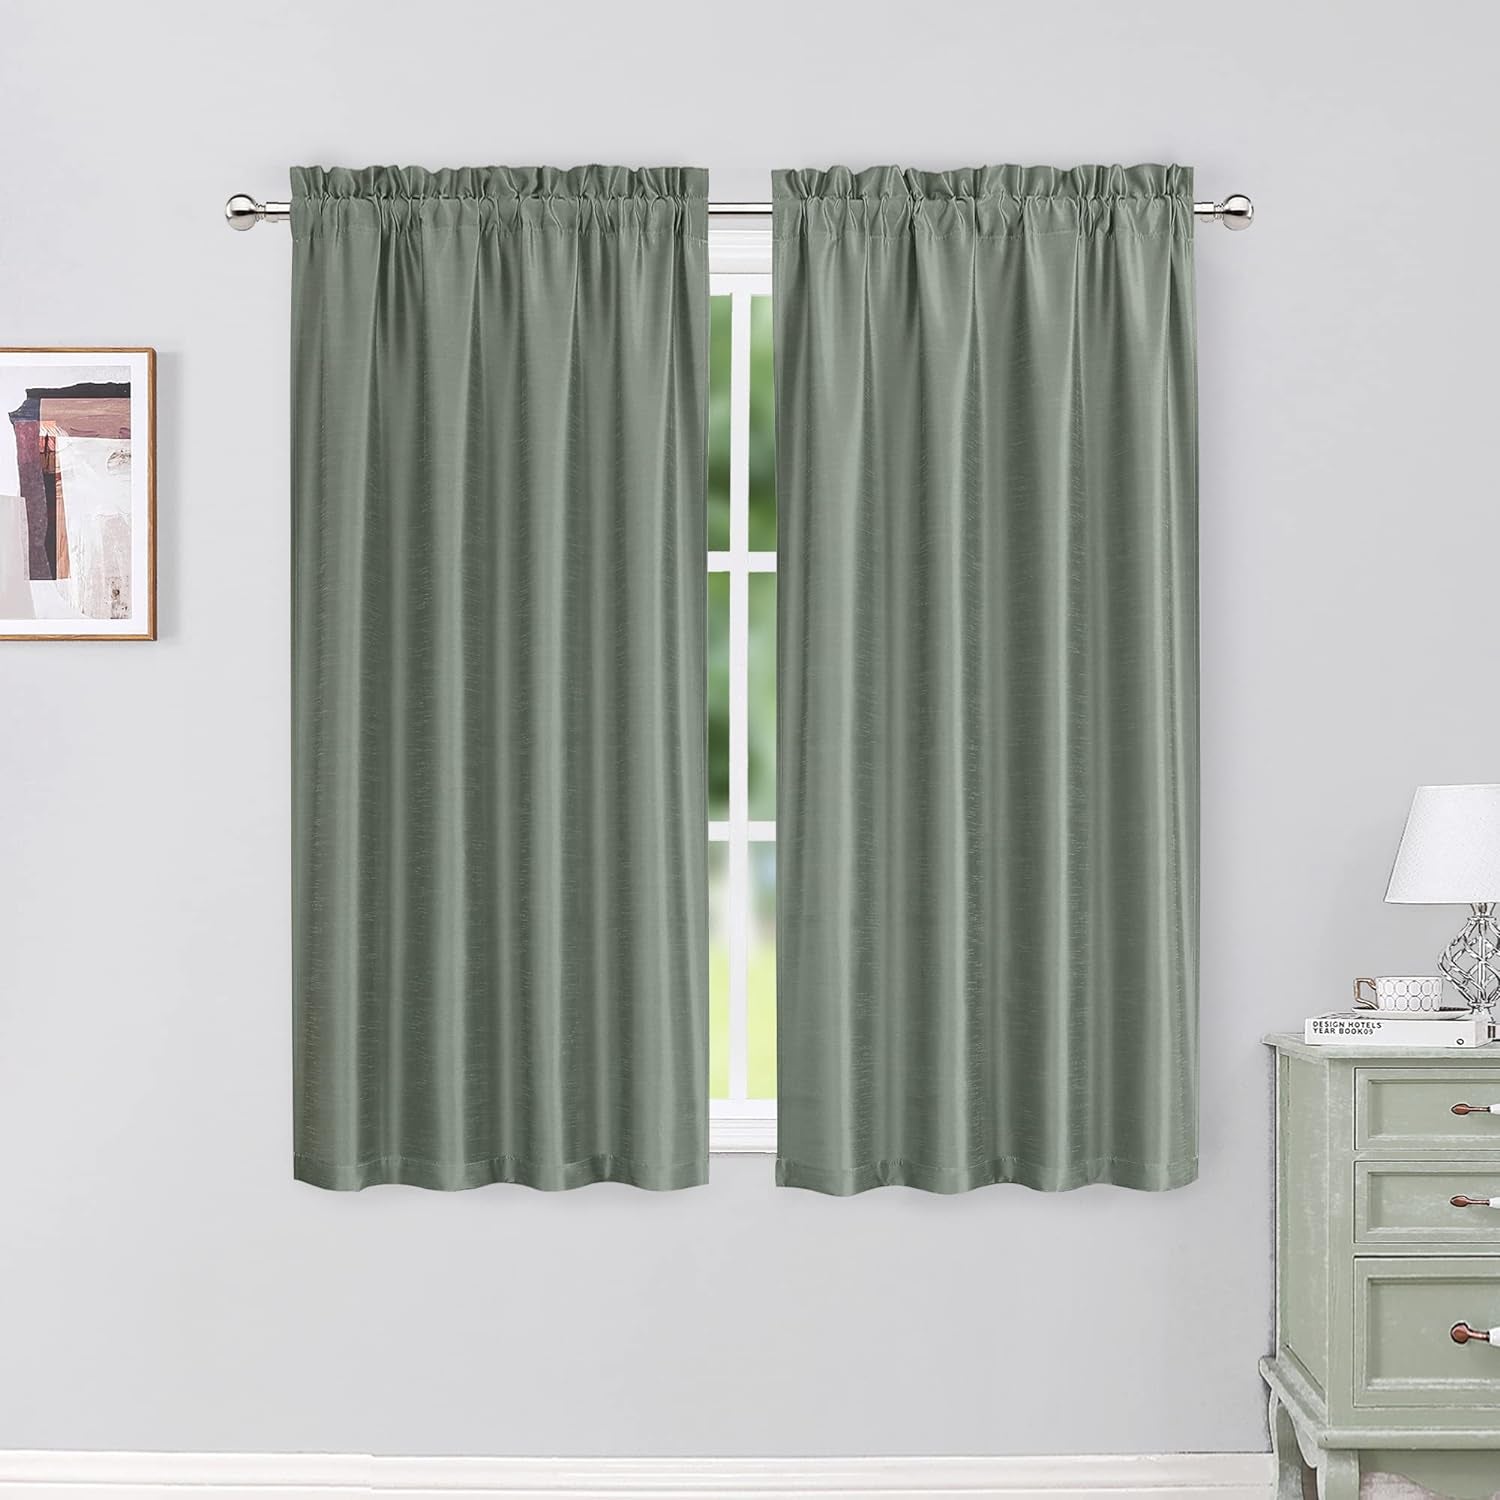 Chyhomenyc Uptown Sage Green Kitchen Curtains 45 Inch Length 2 Panels, Room Darkening Faux Silk Chic Fabric Short Window Curtains for Bedroom Living Room, Each 30Wx45L  Chyhomenyc Sage Green 2X30"Wx54"L 